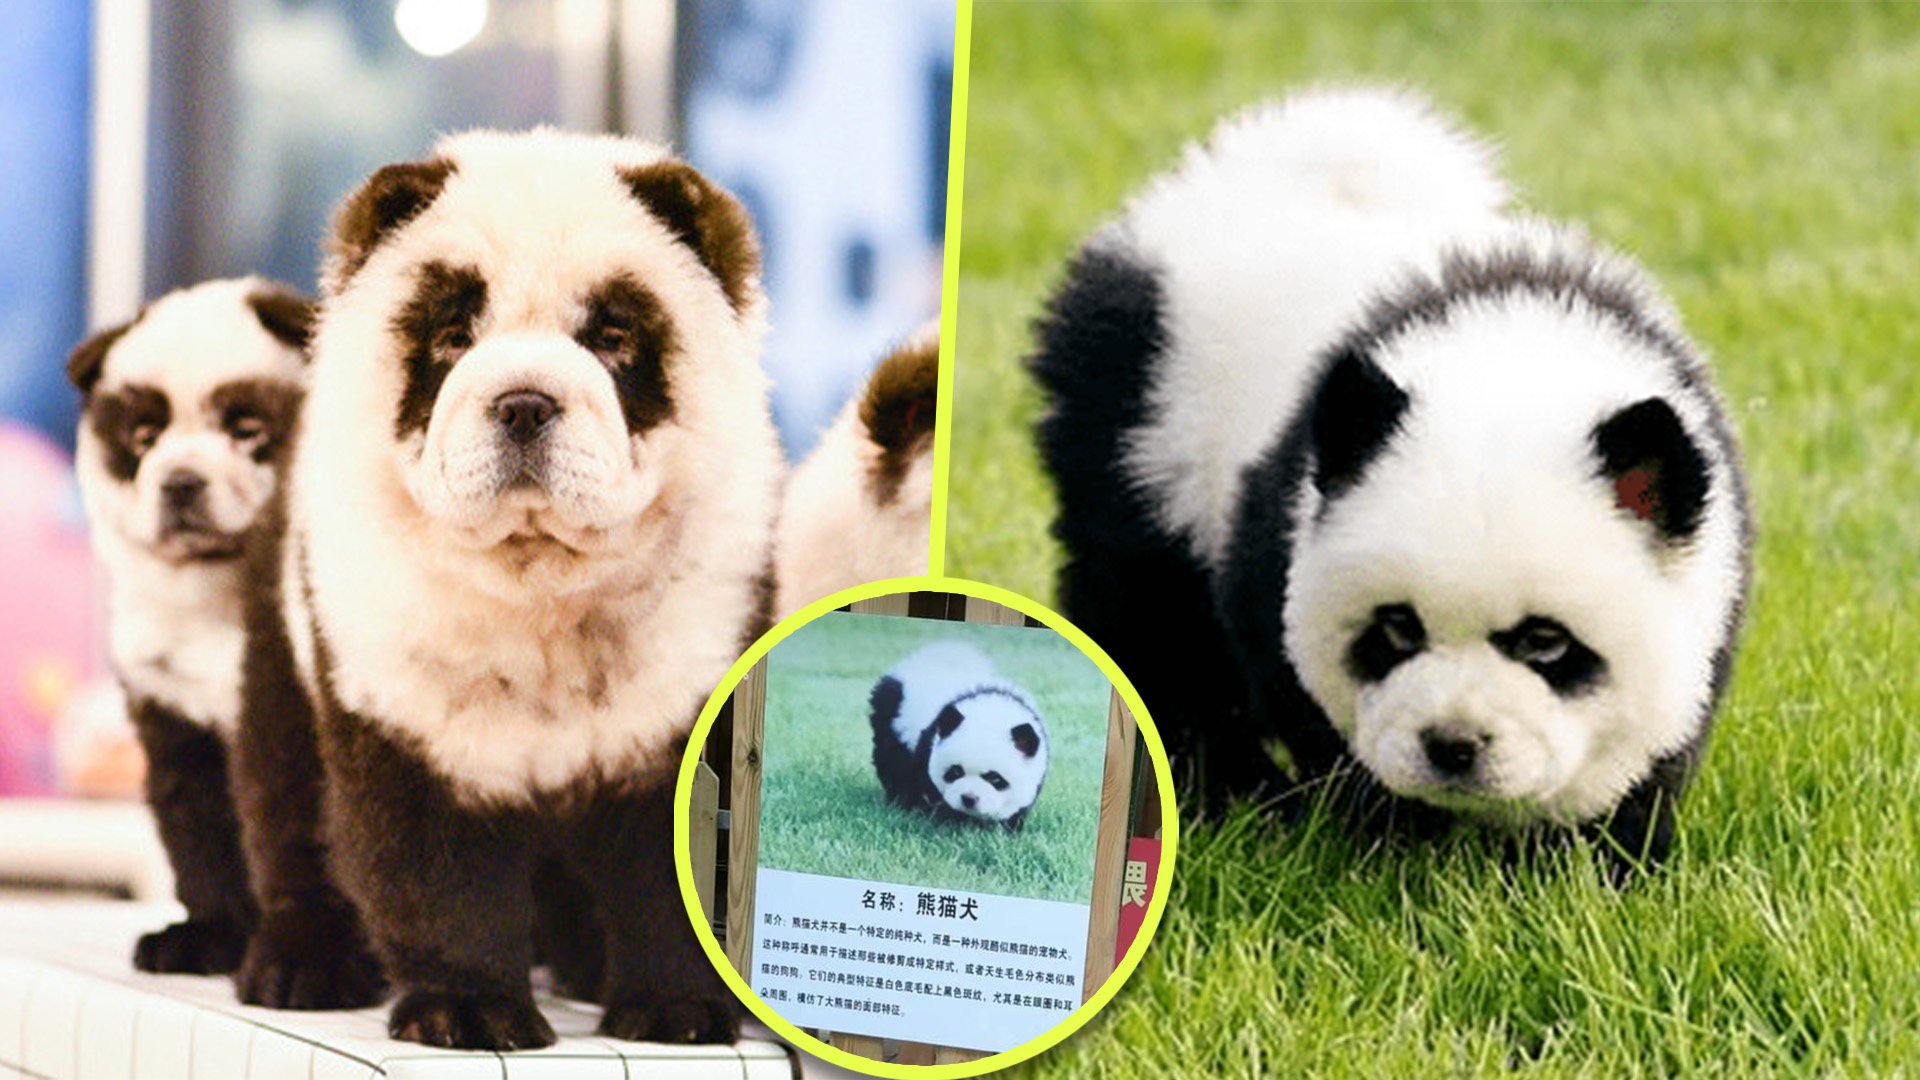 A zoo in China is facing allegations of animal cruelty for putting dyed dogs on display which look like, but are not, Giant Pandas. Photo: SCMP composite/Weibo/163.com